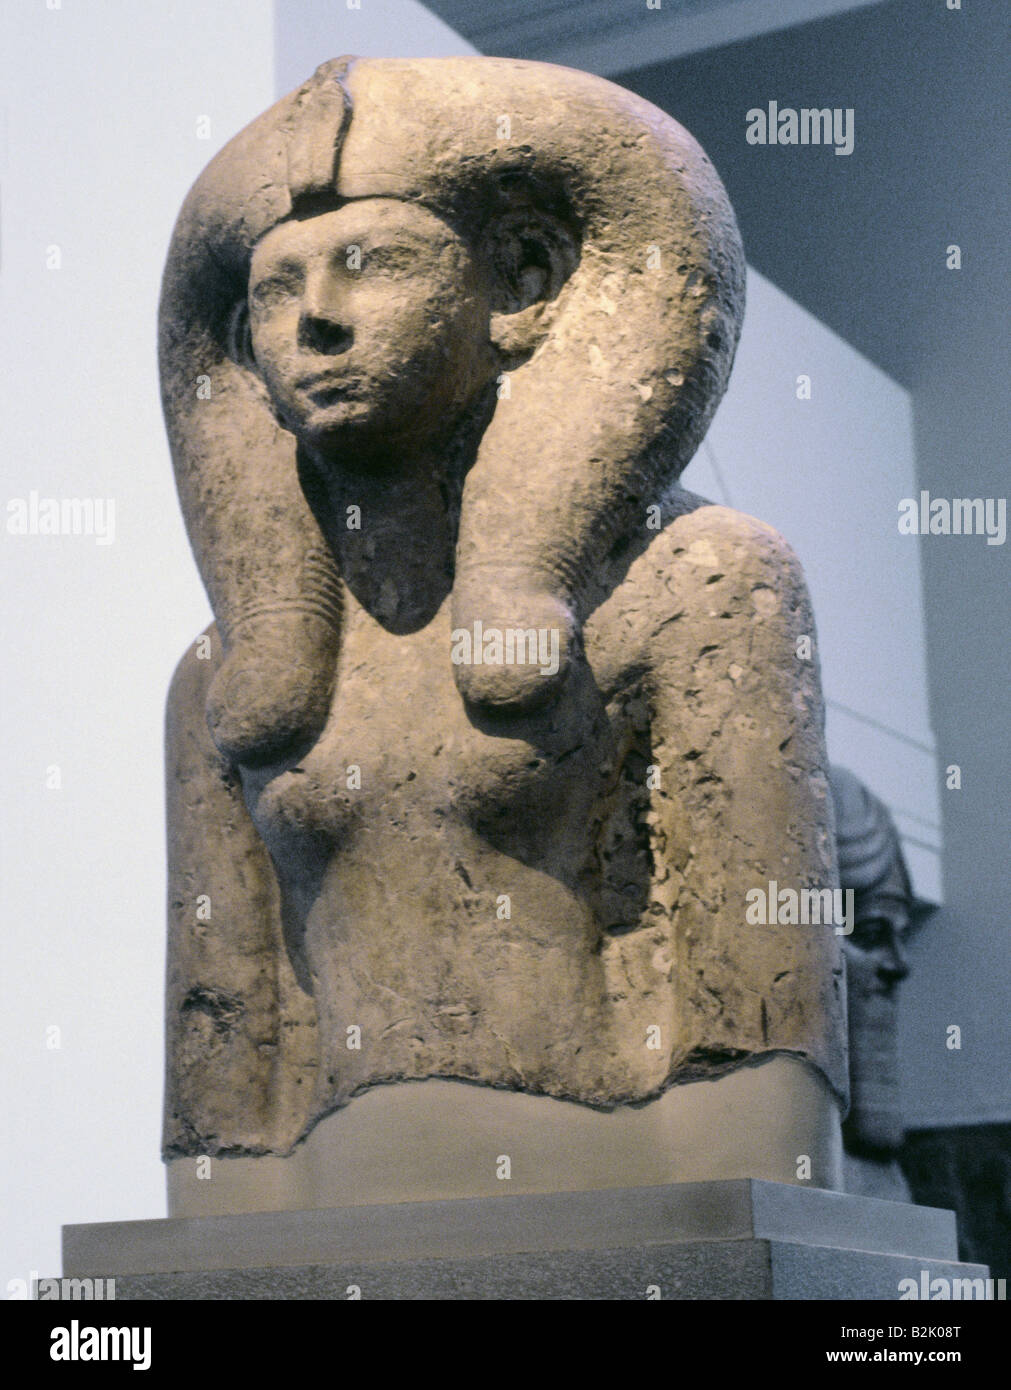 fine arts, ancient world, Egypt, sculpture, Queen Meritamun, wife of King Amenhotep I (circa 1514 - 1493 BC, 18th dynasty), Karnak, British Museum, London,   , Artist's Copyright has not to be cleared Stock Photo